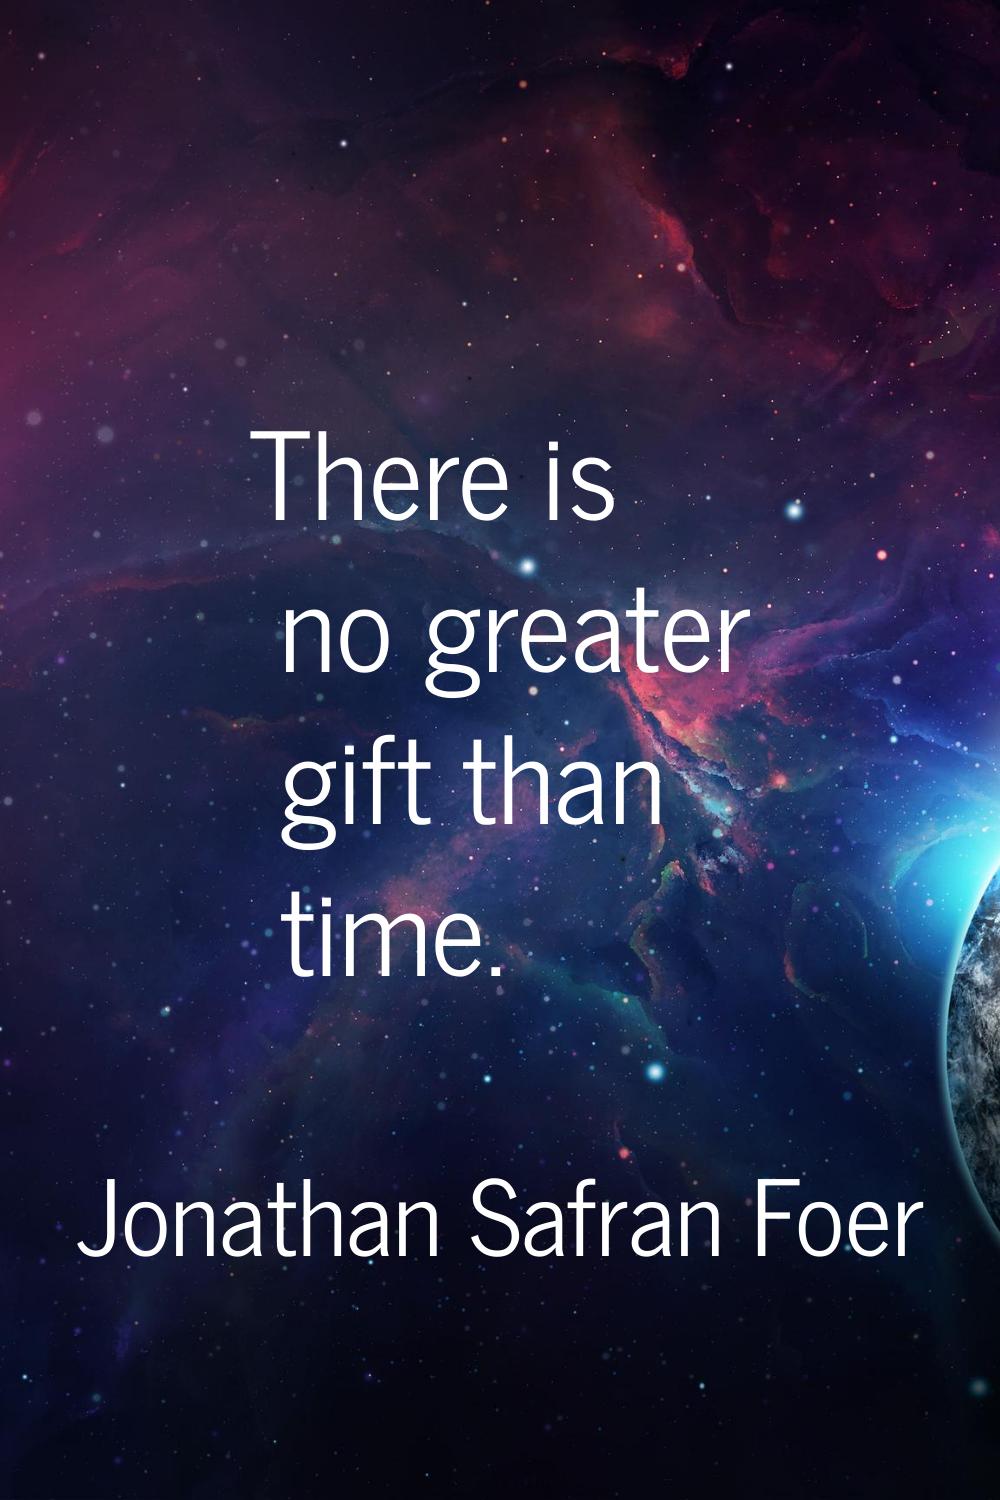 There is no greater gift than time.